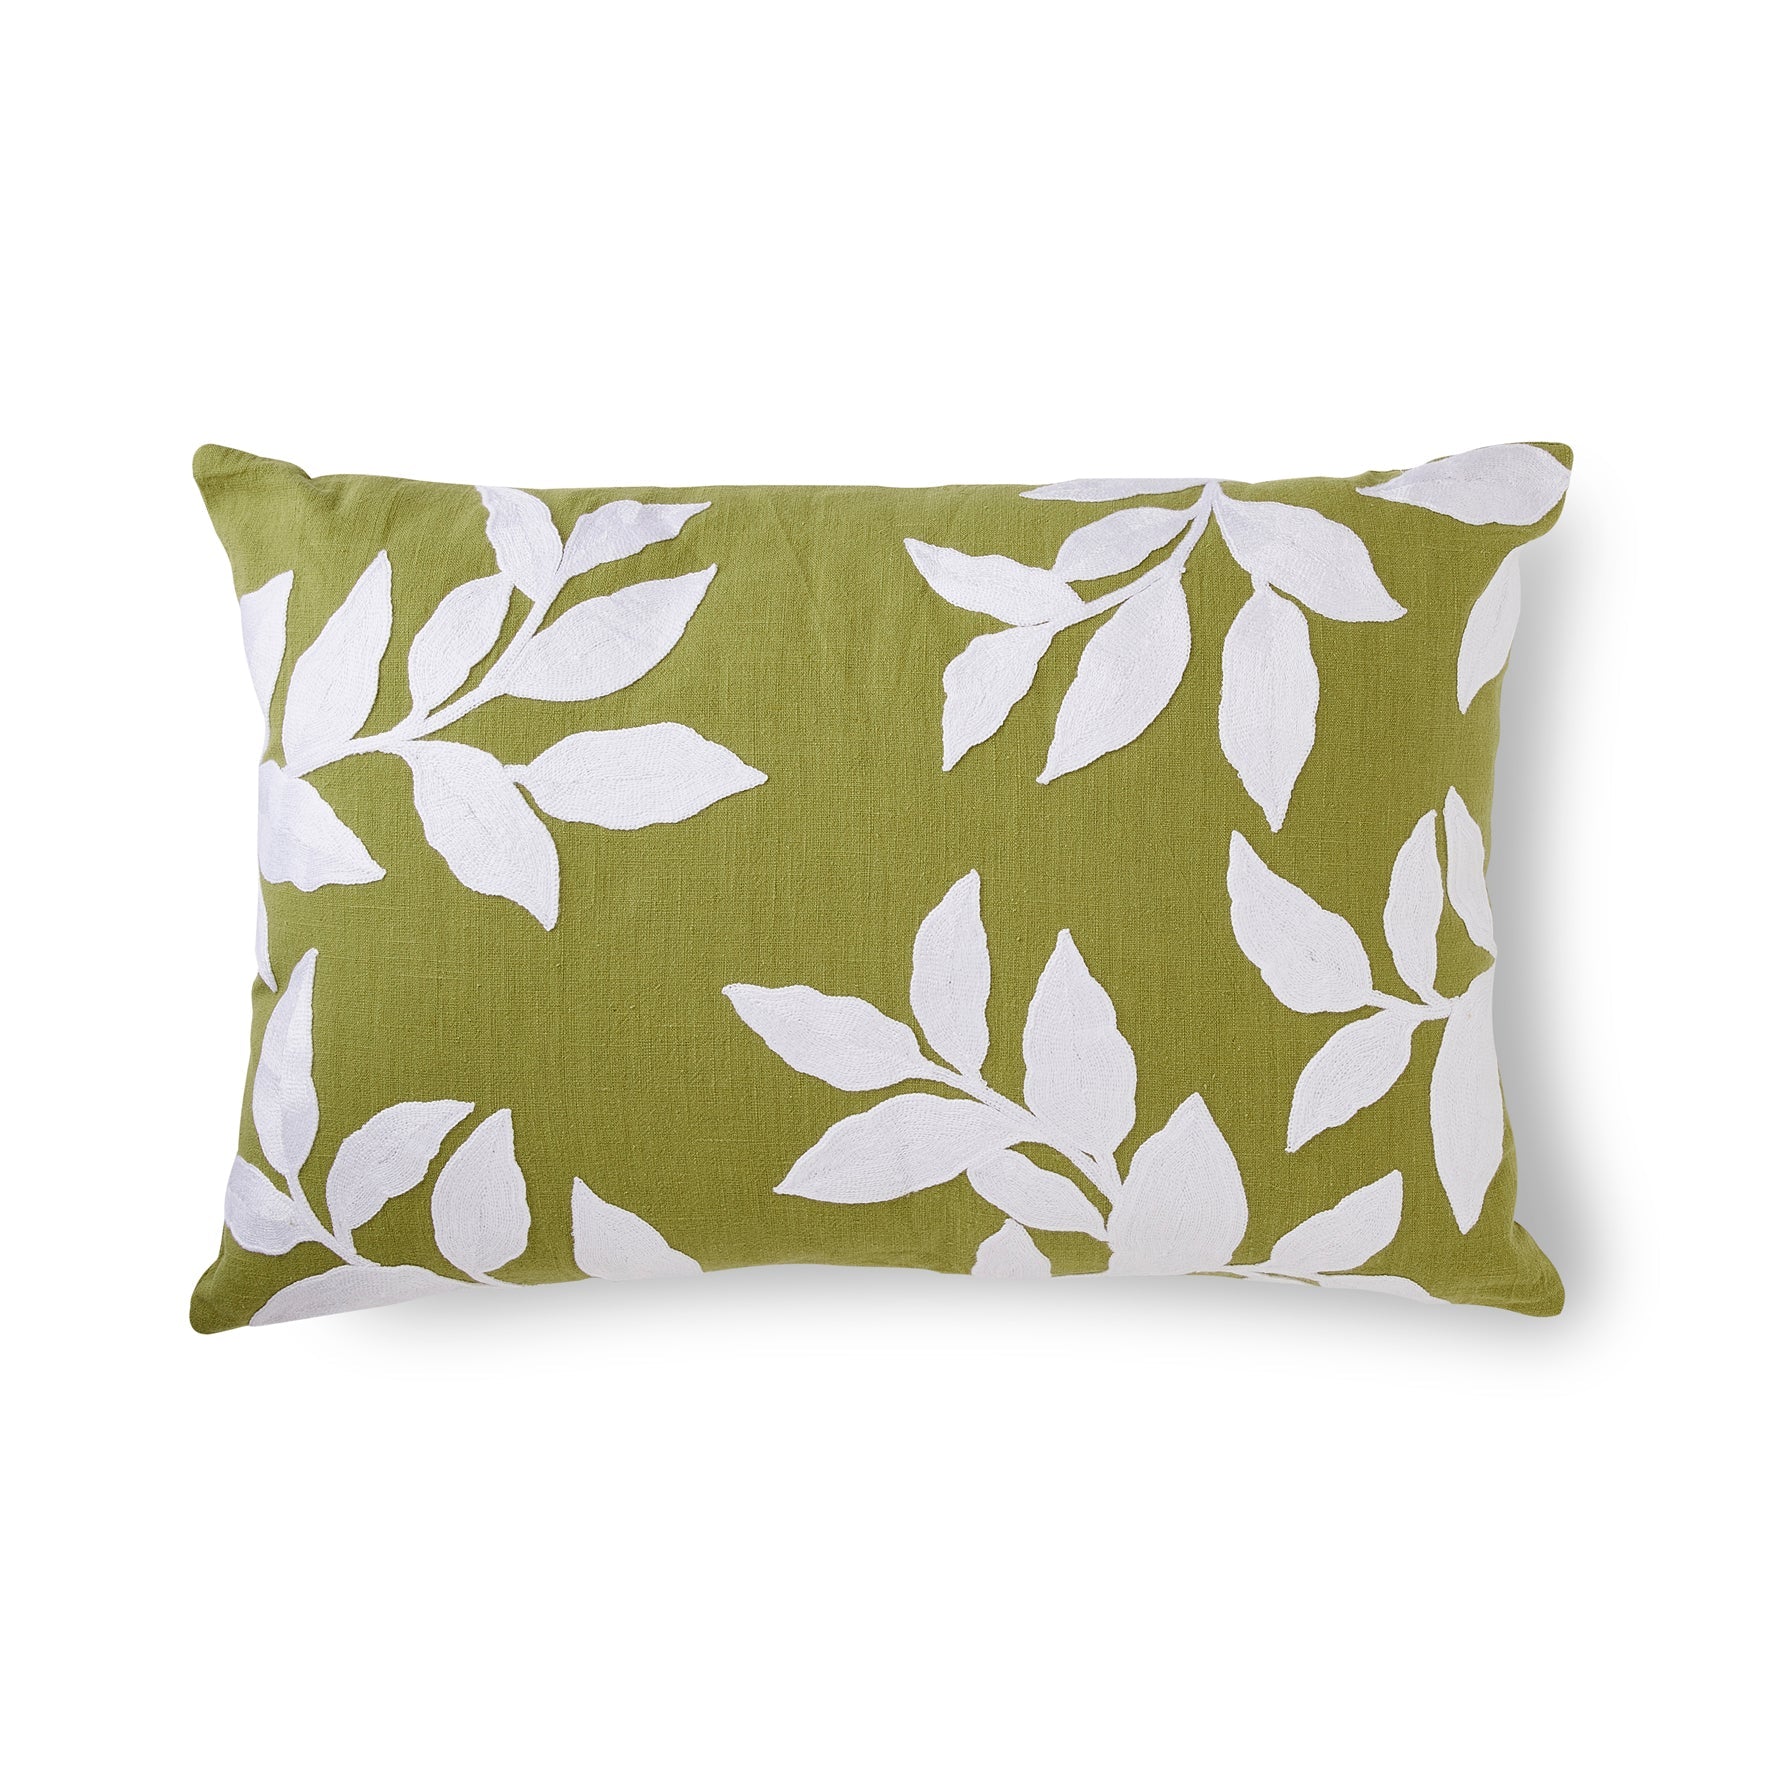 Riviera Green Embroidered Cushion 40x60cm-Soft Furnishings-Madras Link-The Bay Room